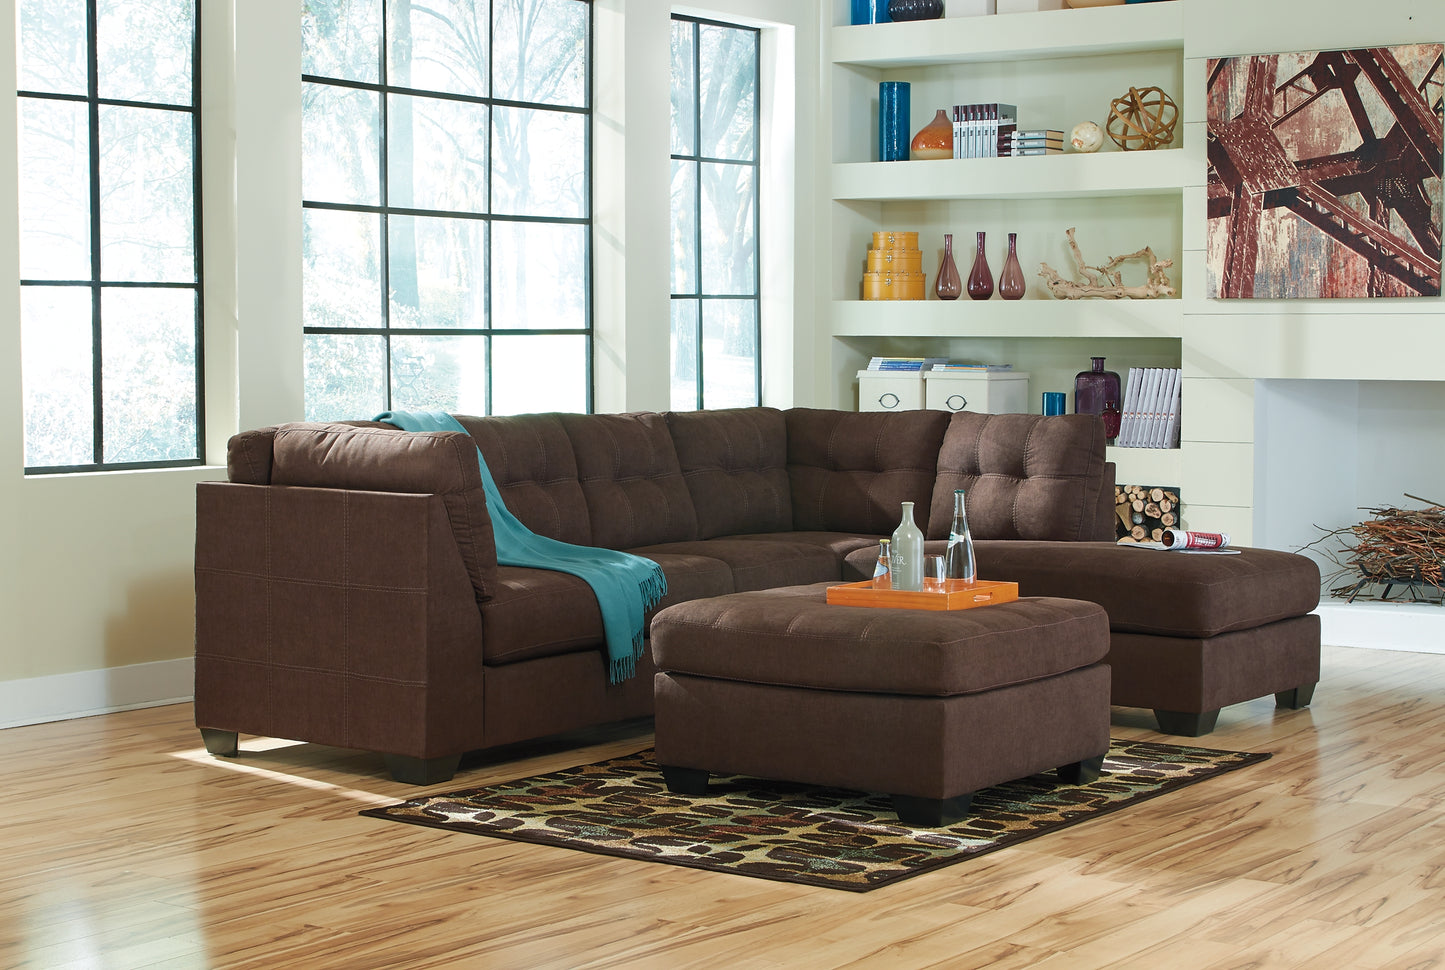 Maier 2-Piece Sectional with Ottoman JB's Furniture  Home Furniture, Home Decor, Furniture Store